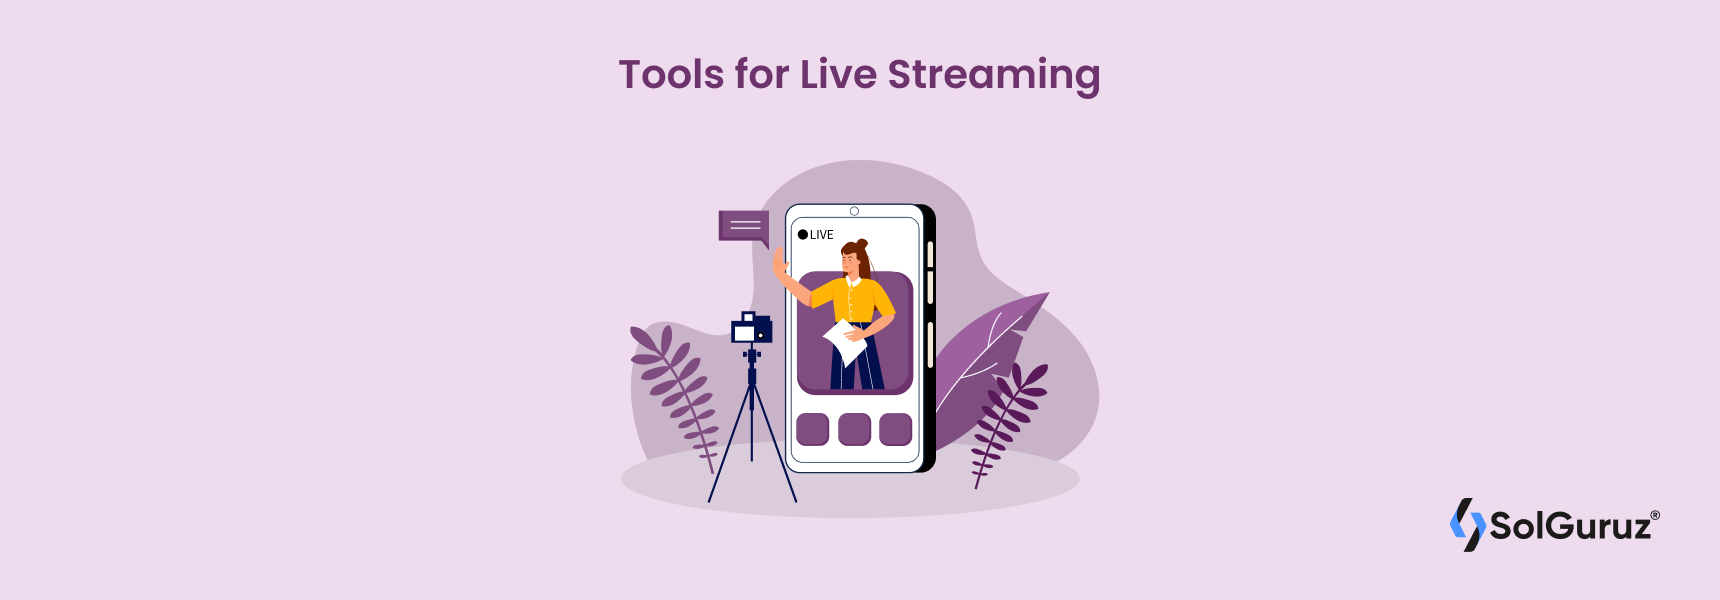 Tools for Live Streaming